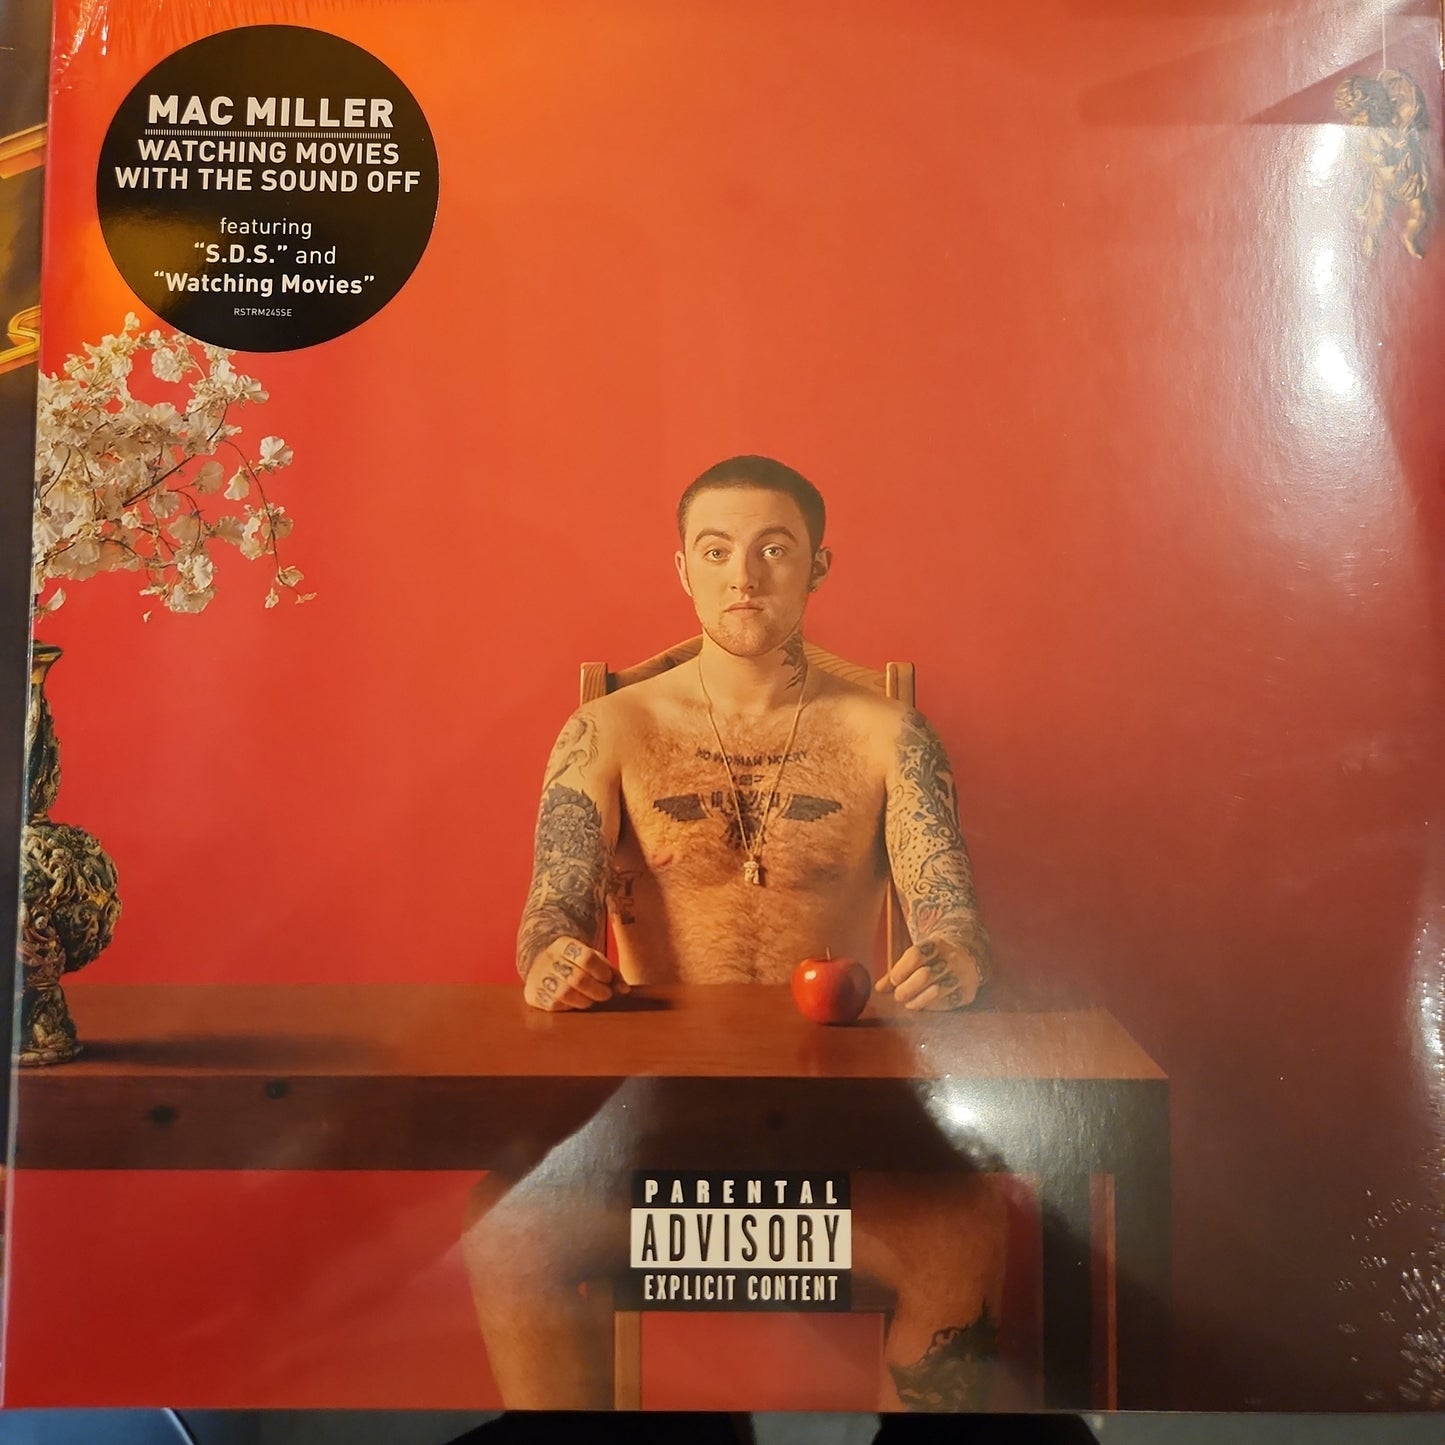 Mac Miller - Watching Movies with the Sound off - Double Vinyl LP